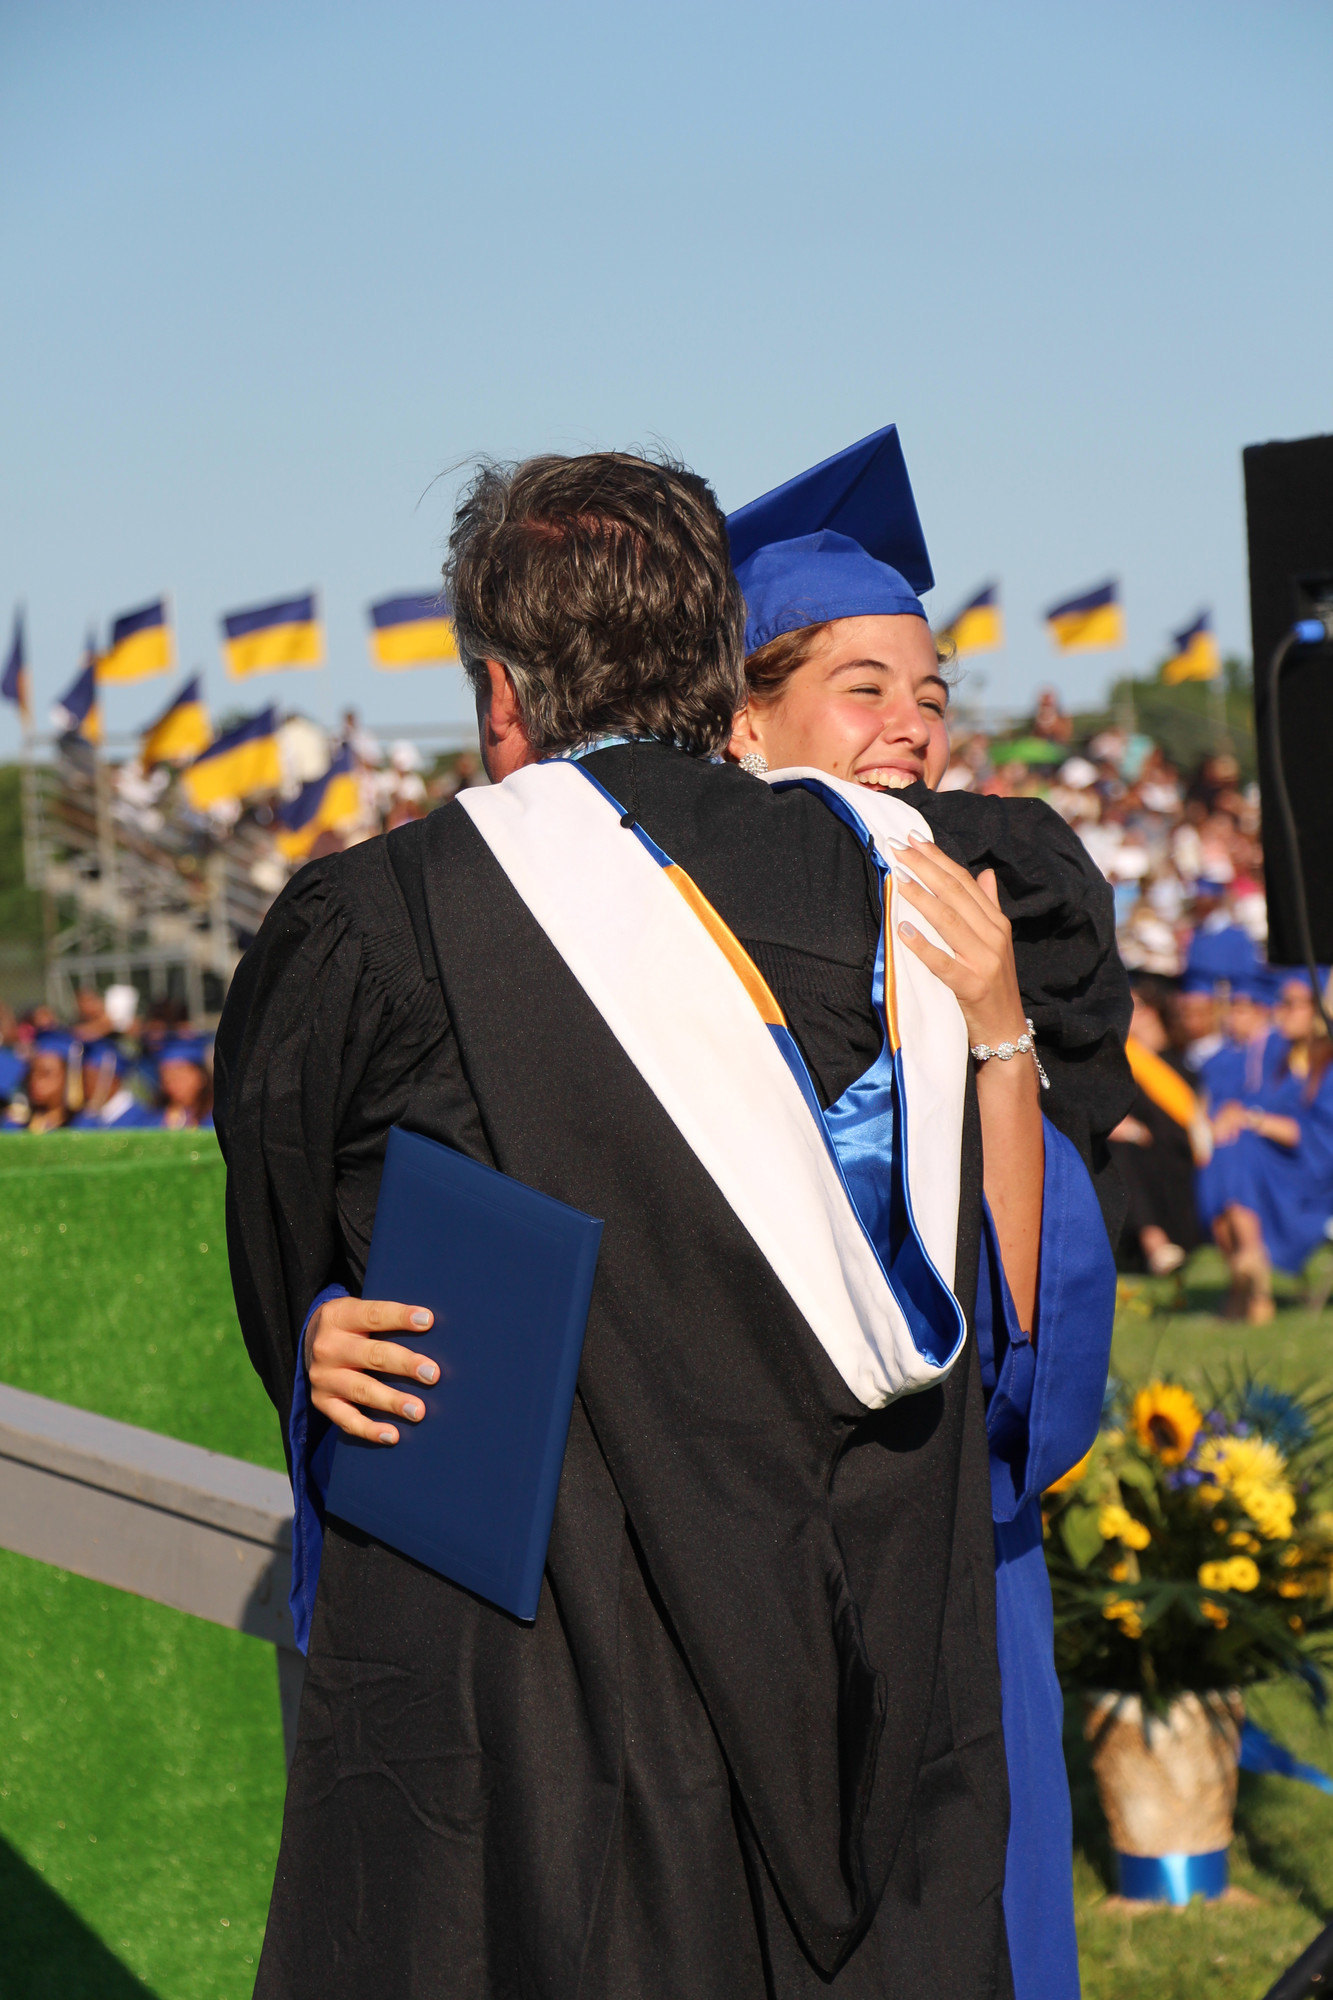 Brittney Scannell got her diploma, then got a big hug from her uncle, Superintendent James Scannell.